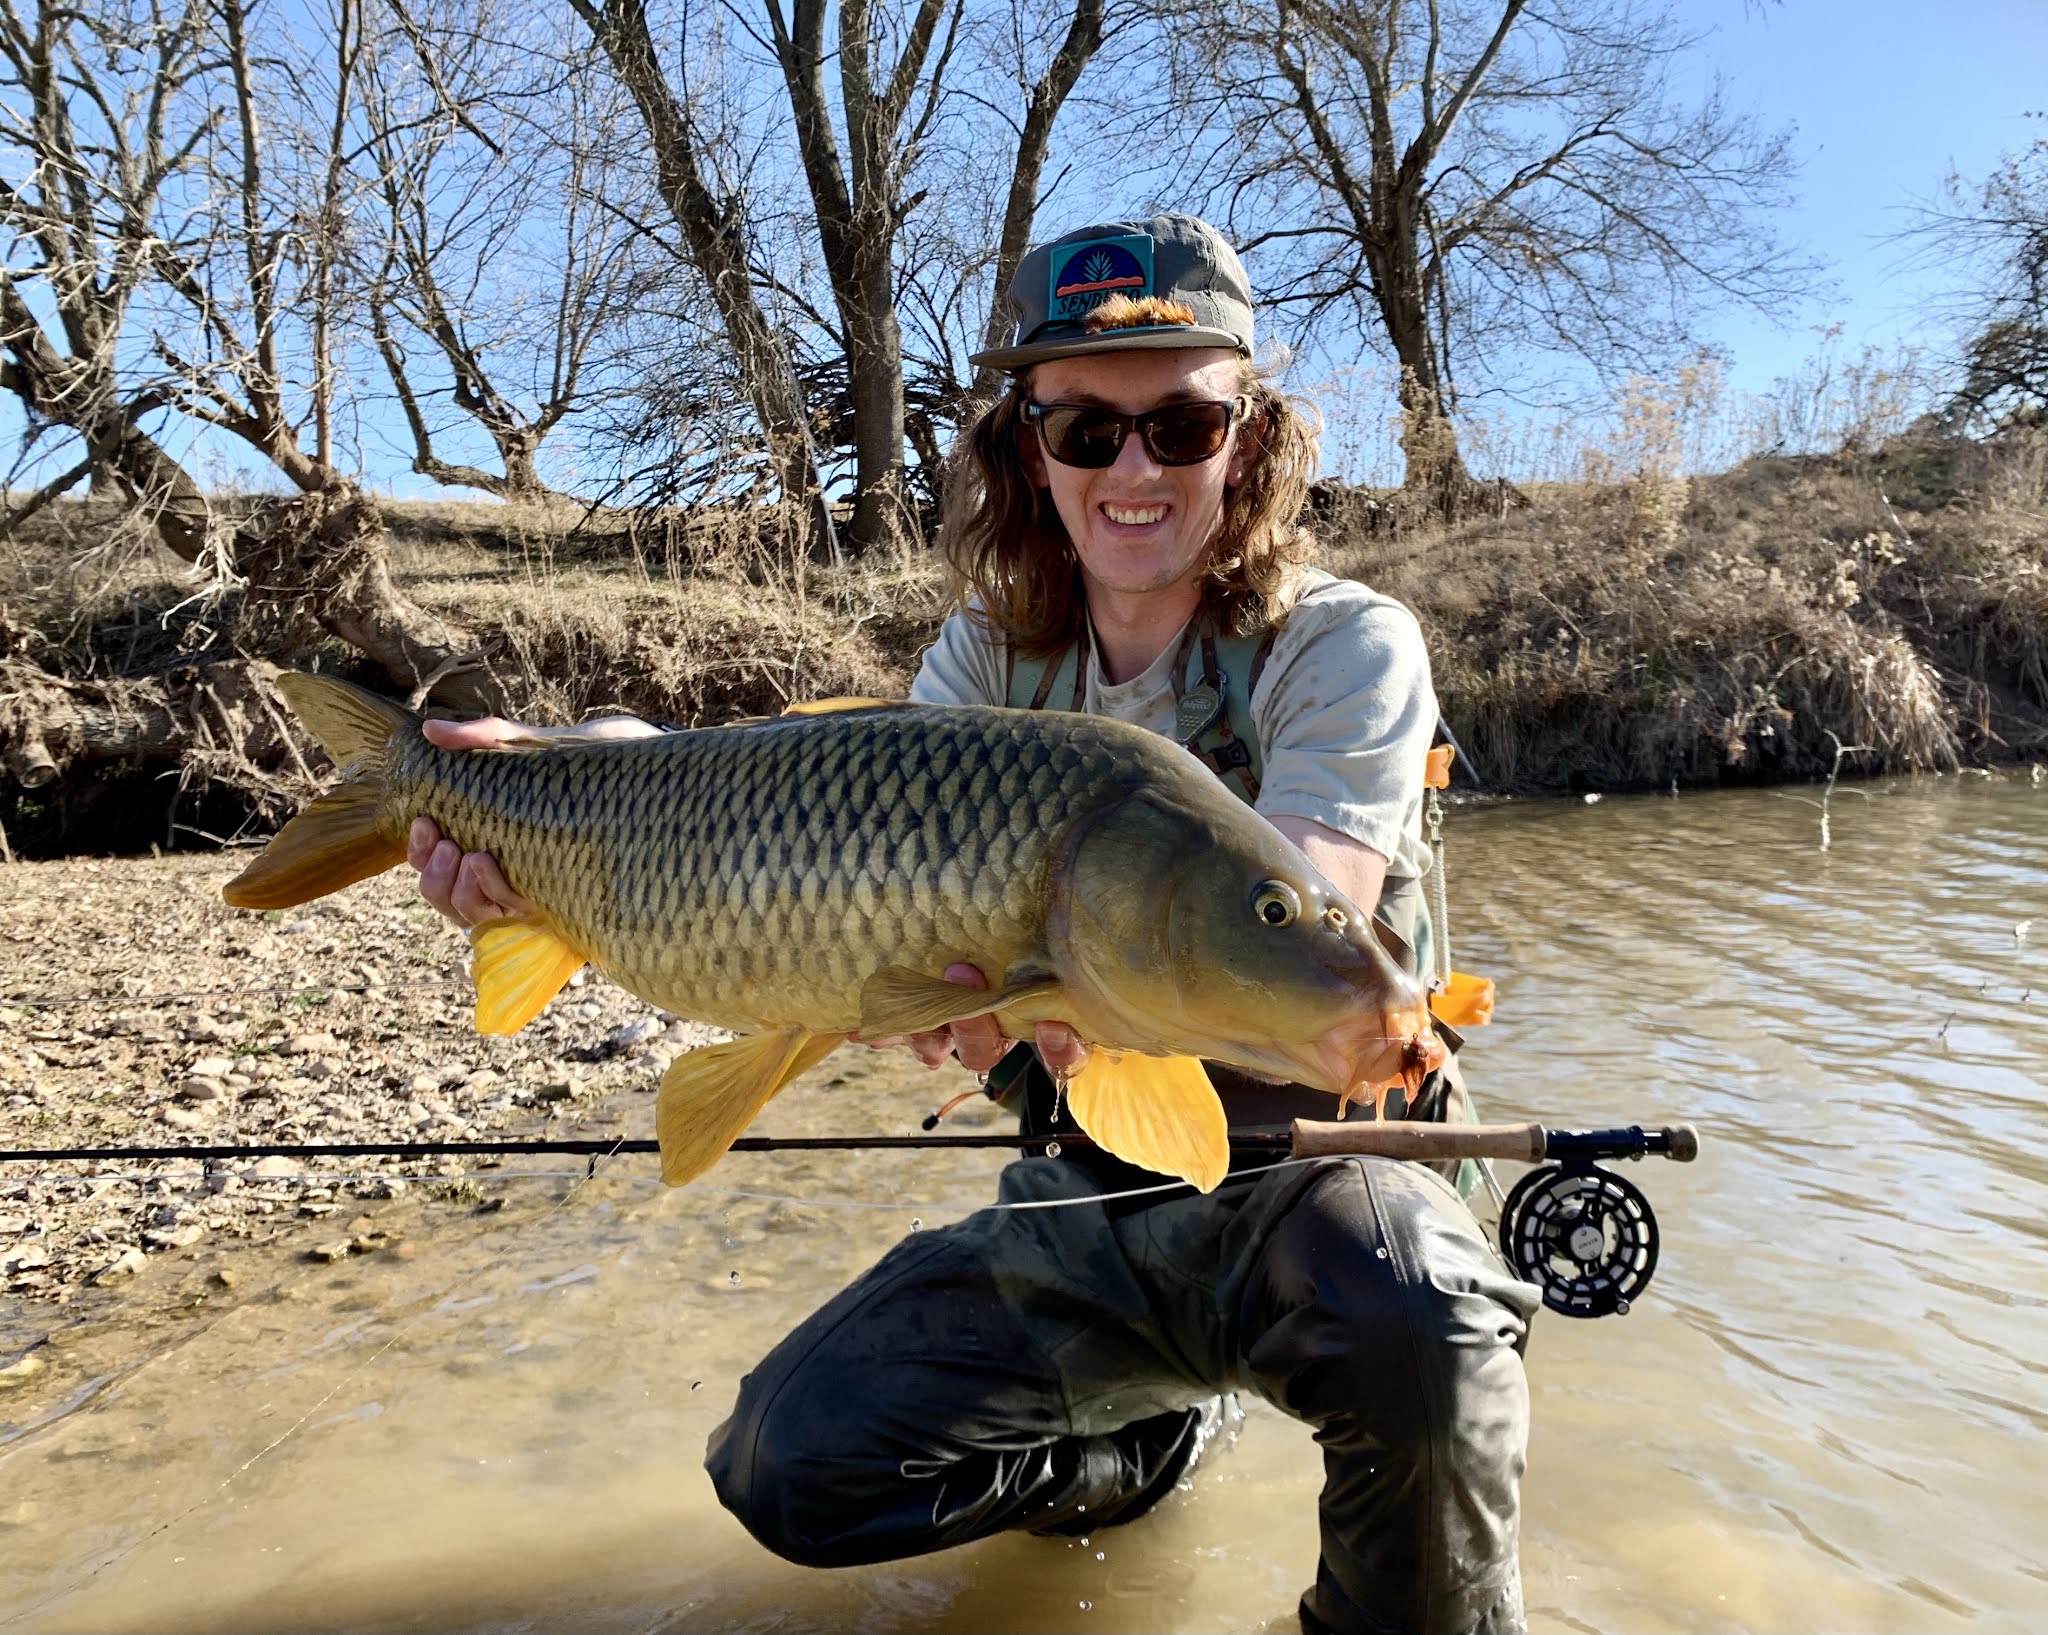 Carp in Texas: Part 4(ish) - Interview with Gabe Cross